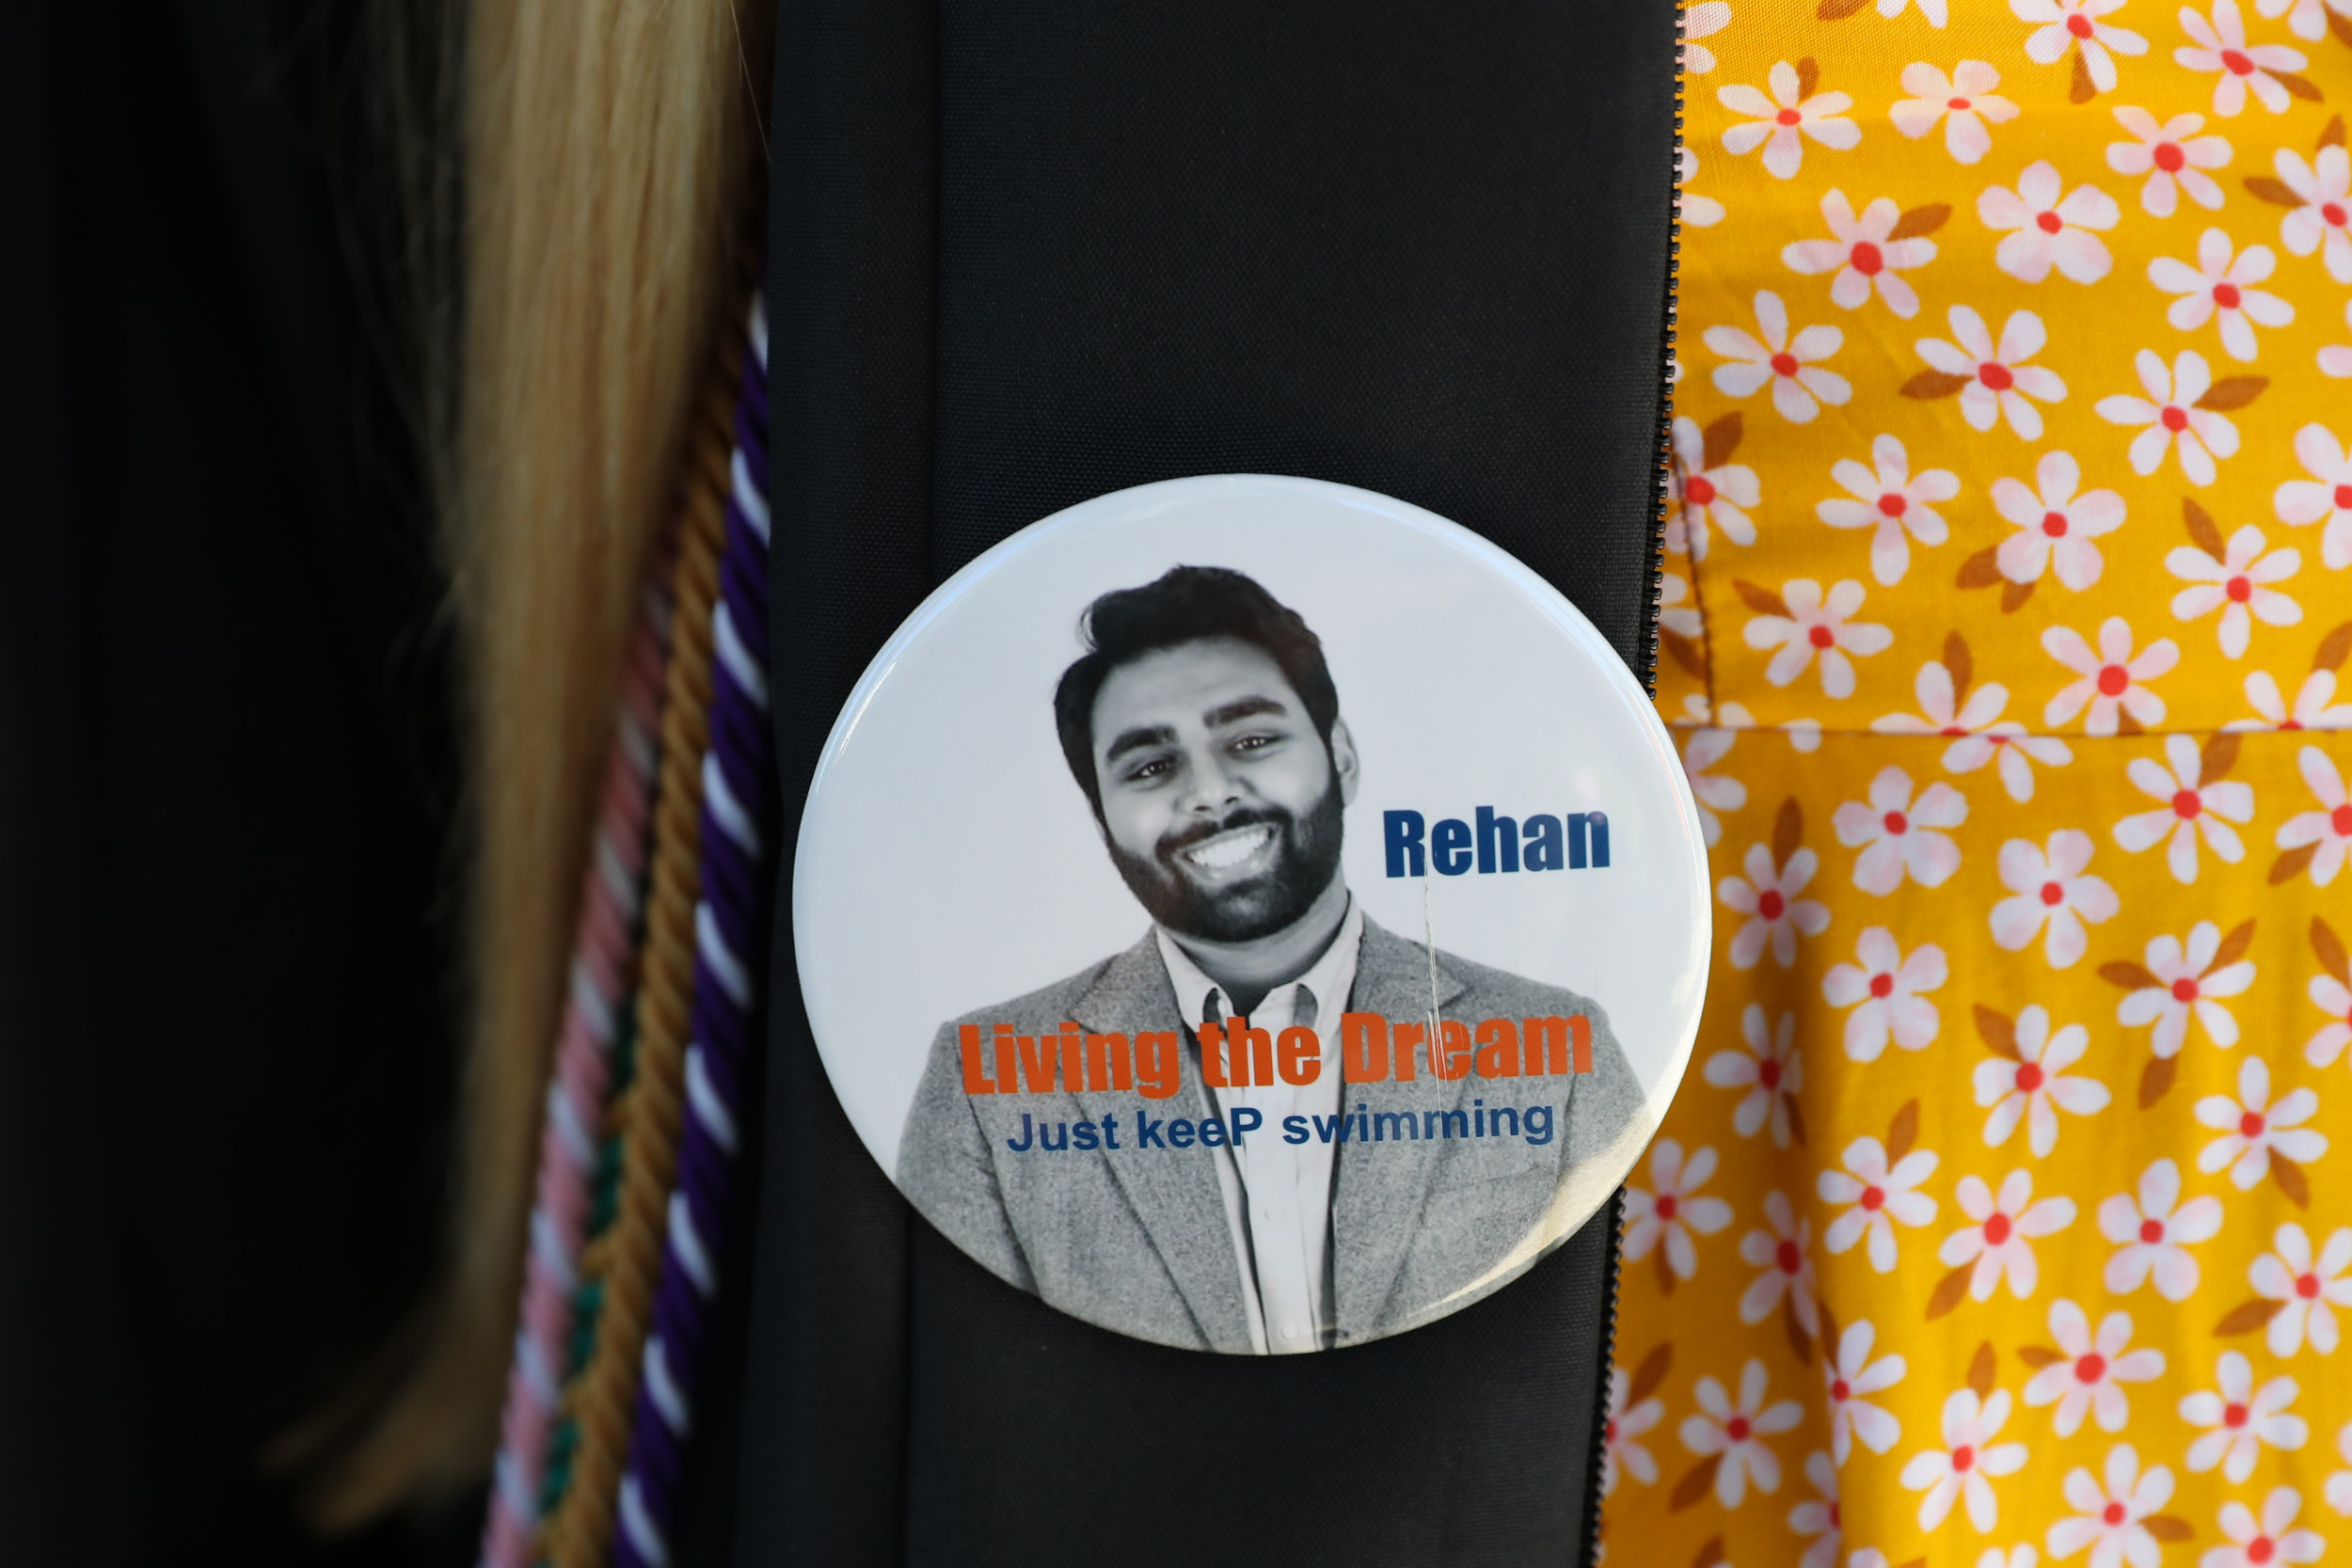 Graduate wears a pin that says Rehan Living the Dream Just keeP swimming